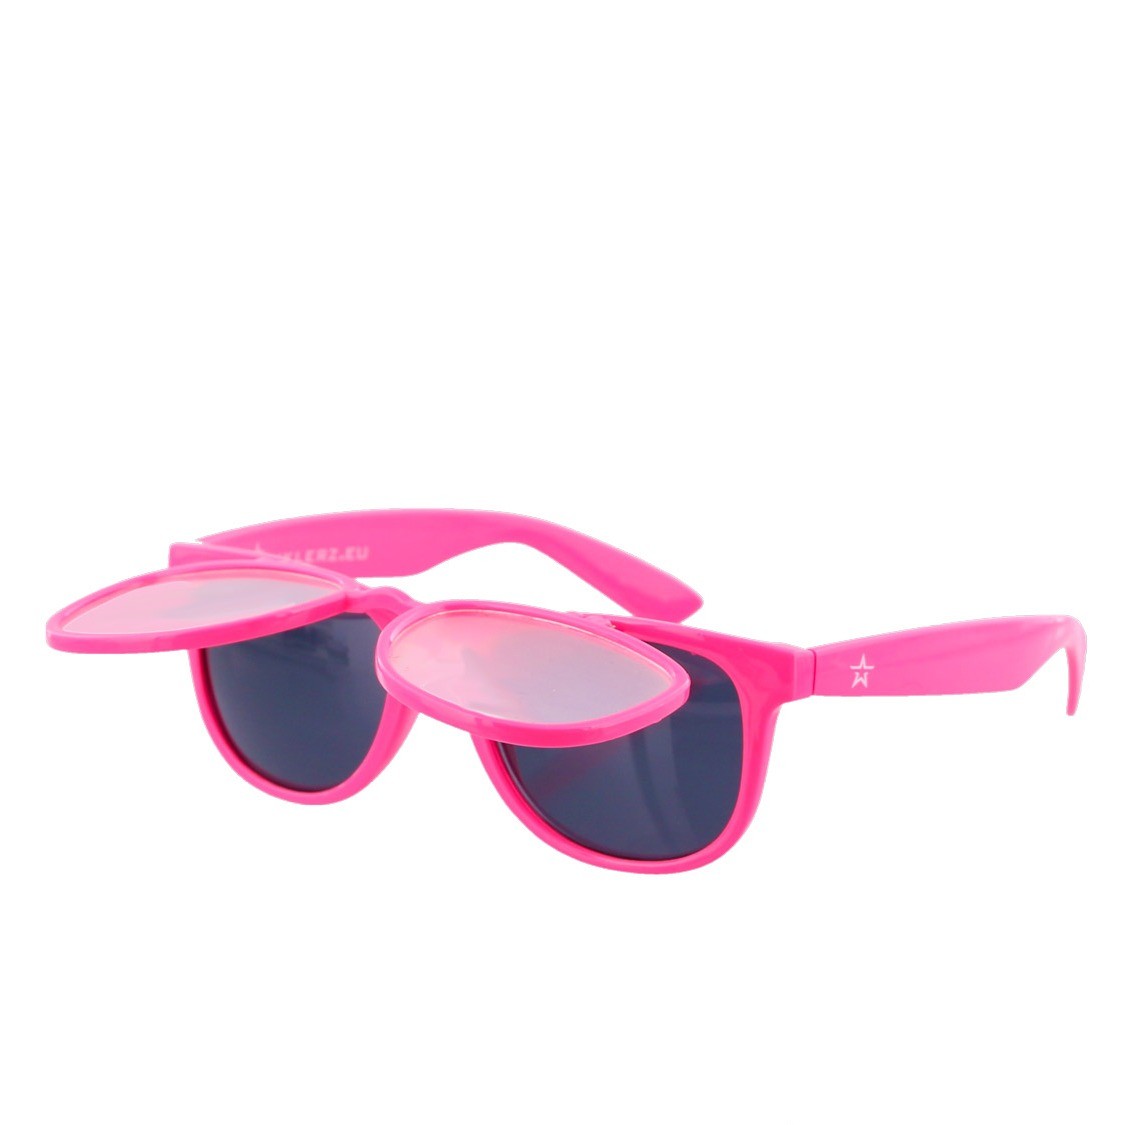 X-Eyes Sunglass Shop - New Gucci additions #neonpink Ph feat. our latest  Gucci collection colorways in oval shaped neon pink frames w/ pink mirrors  (TOP) and squared neon pink cat eyes w/